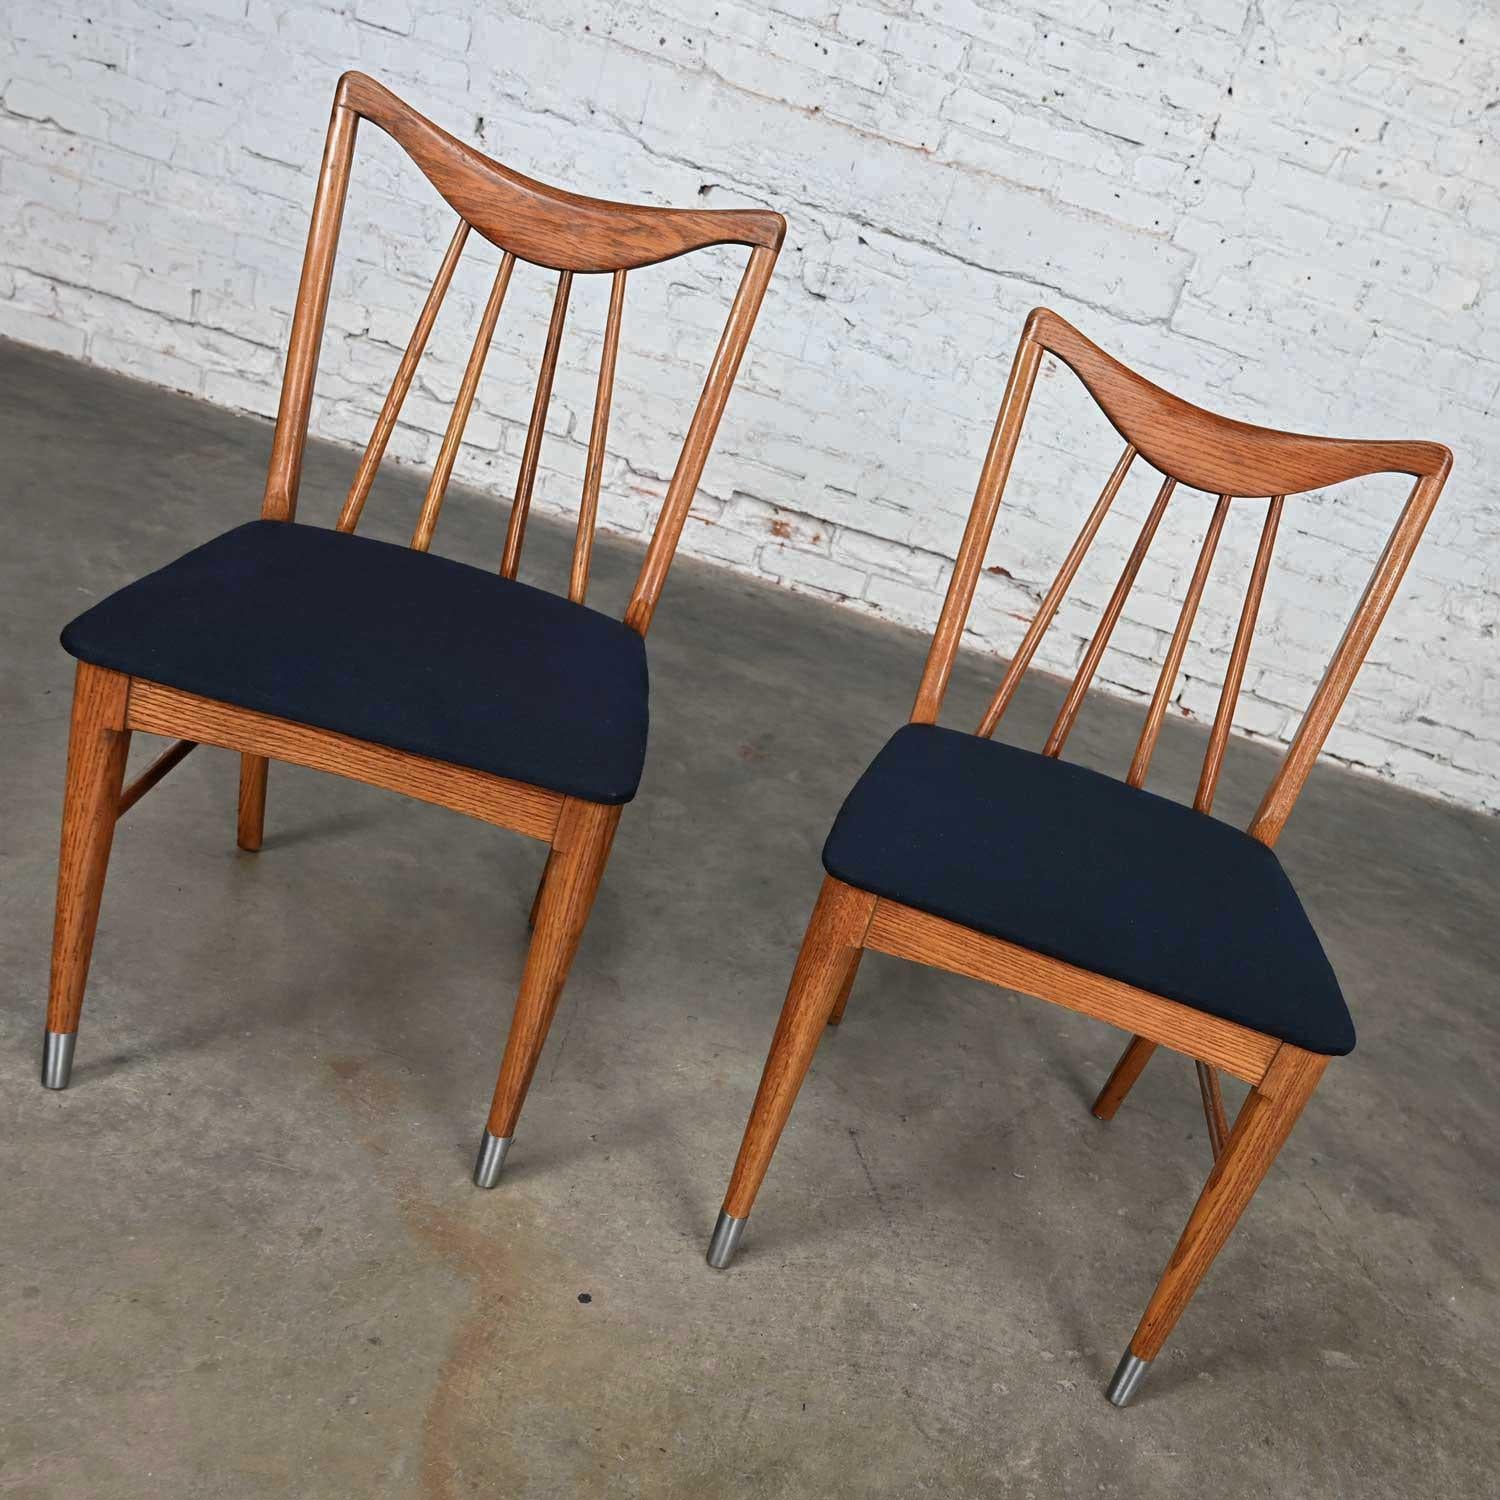 Handsome vintage Mid-Century Modern Keller furniture Valkerie II Line dining or side chairs by Edmond J. Spence, a pair. Comprised of oak frames, blue fabric upholstered seats, and chrome sabots on the front feet. This piece has been attributed